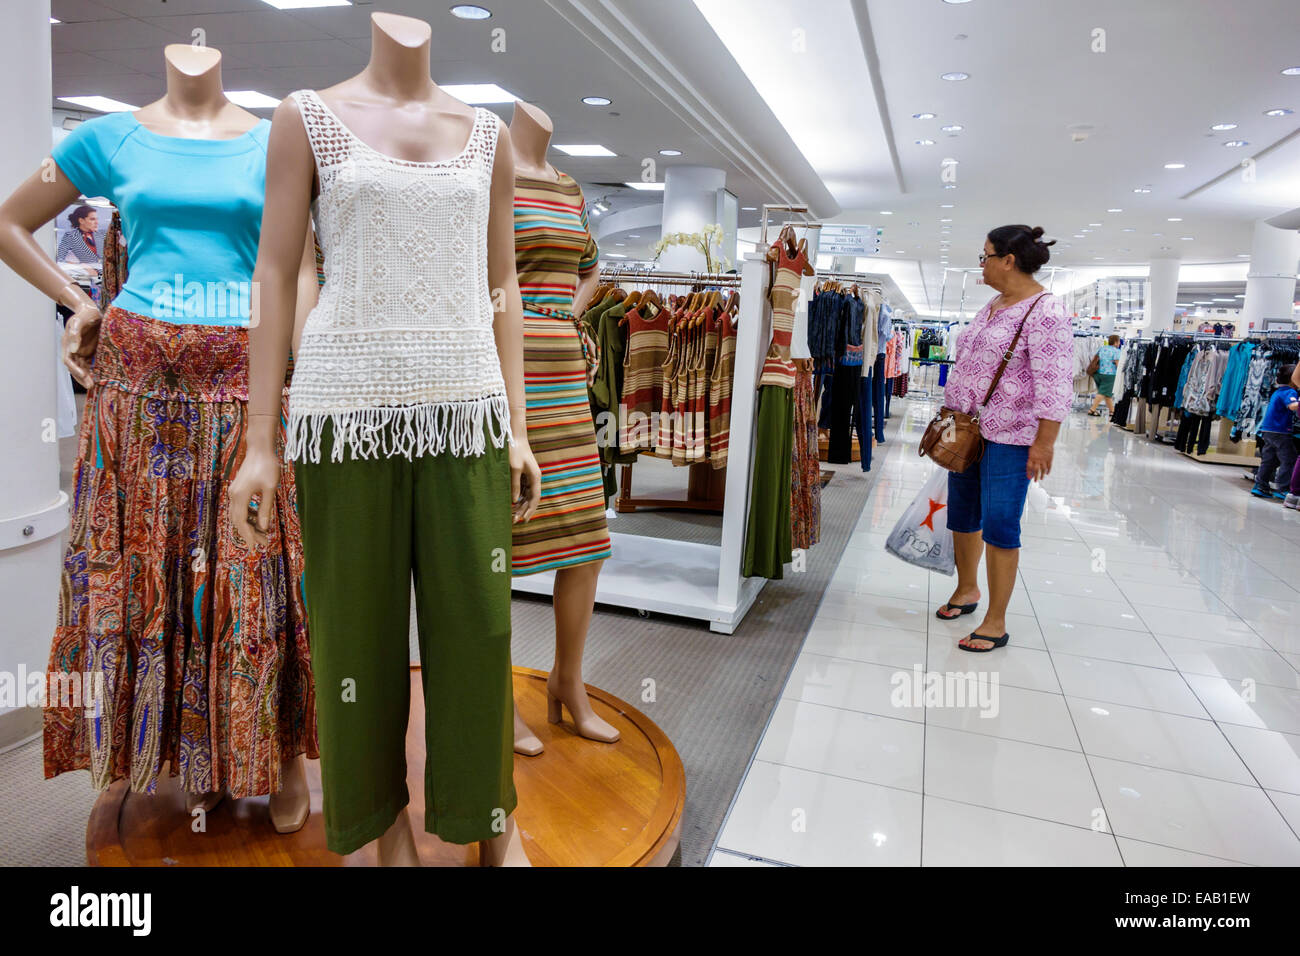 Miami Florida Macy&#39;s department store shopping inside sale display Stock Photo: 75230705 - Alamy